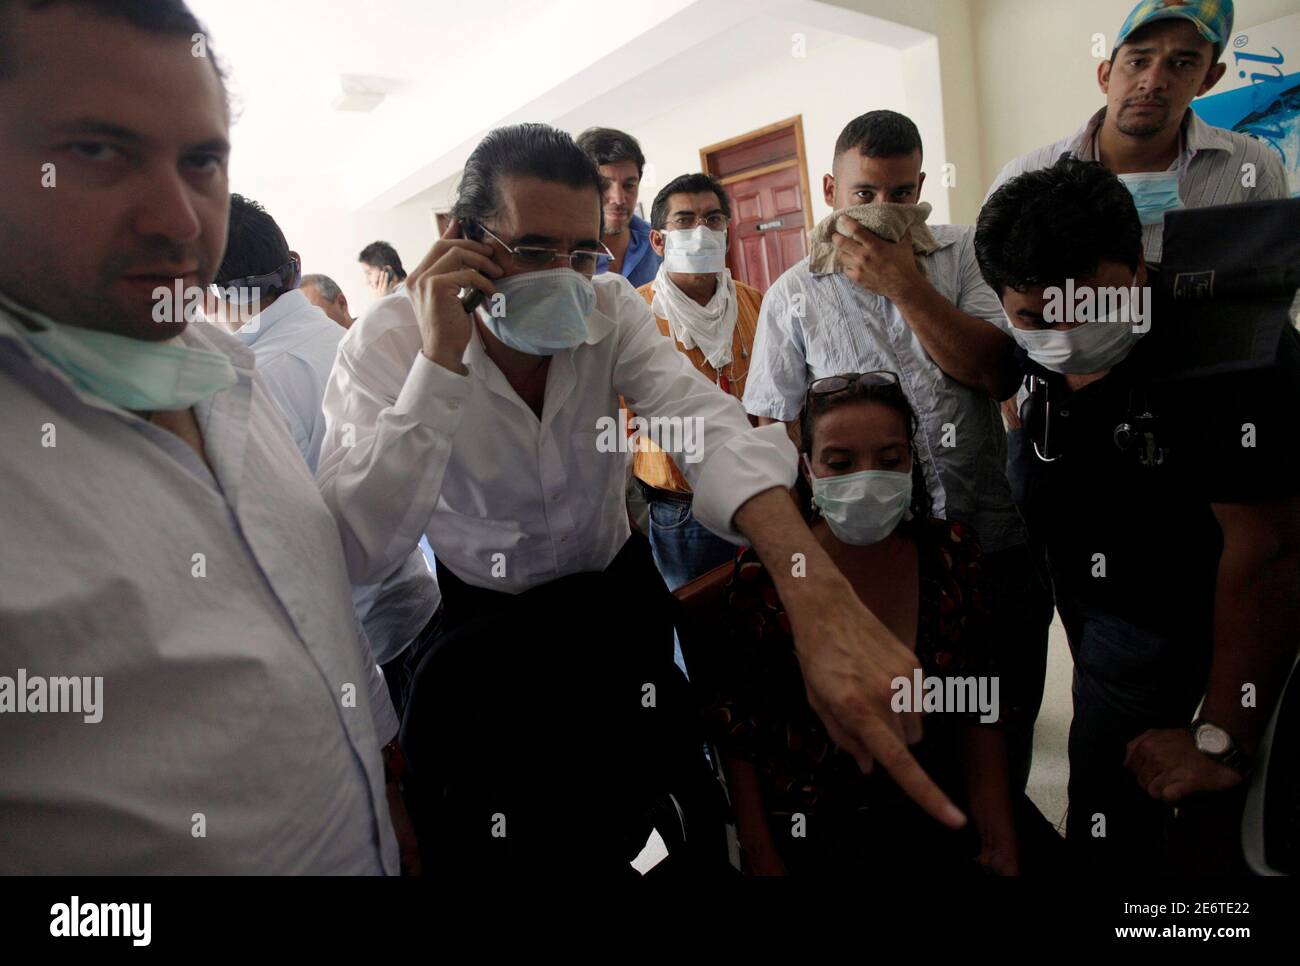 Honduras' ousted President Manuel Zelaya (2nd L) and his wife Xiomara Castro (2nd R) look at a computer while wearing surgical masks in the Brazilian embassy in Tegucigalpa September 25, 2009. Zelaya, who is sheltering in the embassy after slipping back into the country on Monday, accused the de facto government of injecting 'toxic gas' into the building during a news conference given to journalists still inside the building. Many inside the embassy complained of burning throats, while others showed the presence what seemed to be trace of blood in their saliva.  REUTERS/Edgard Garrido (HONDURA Stock Photo